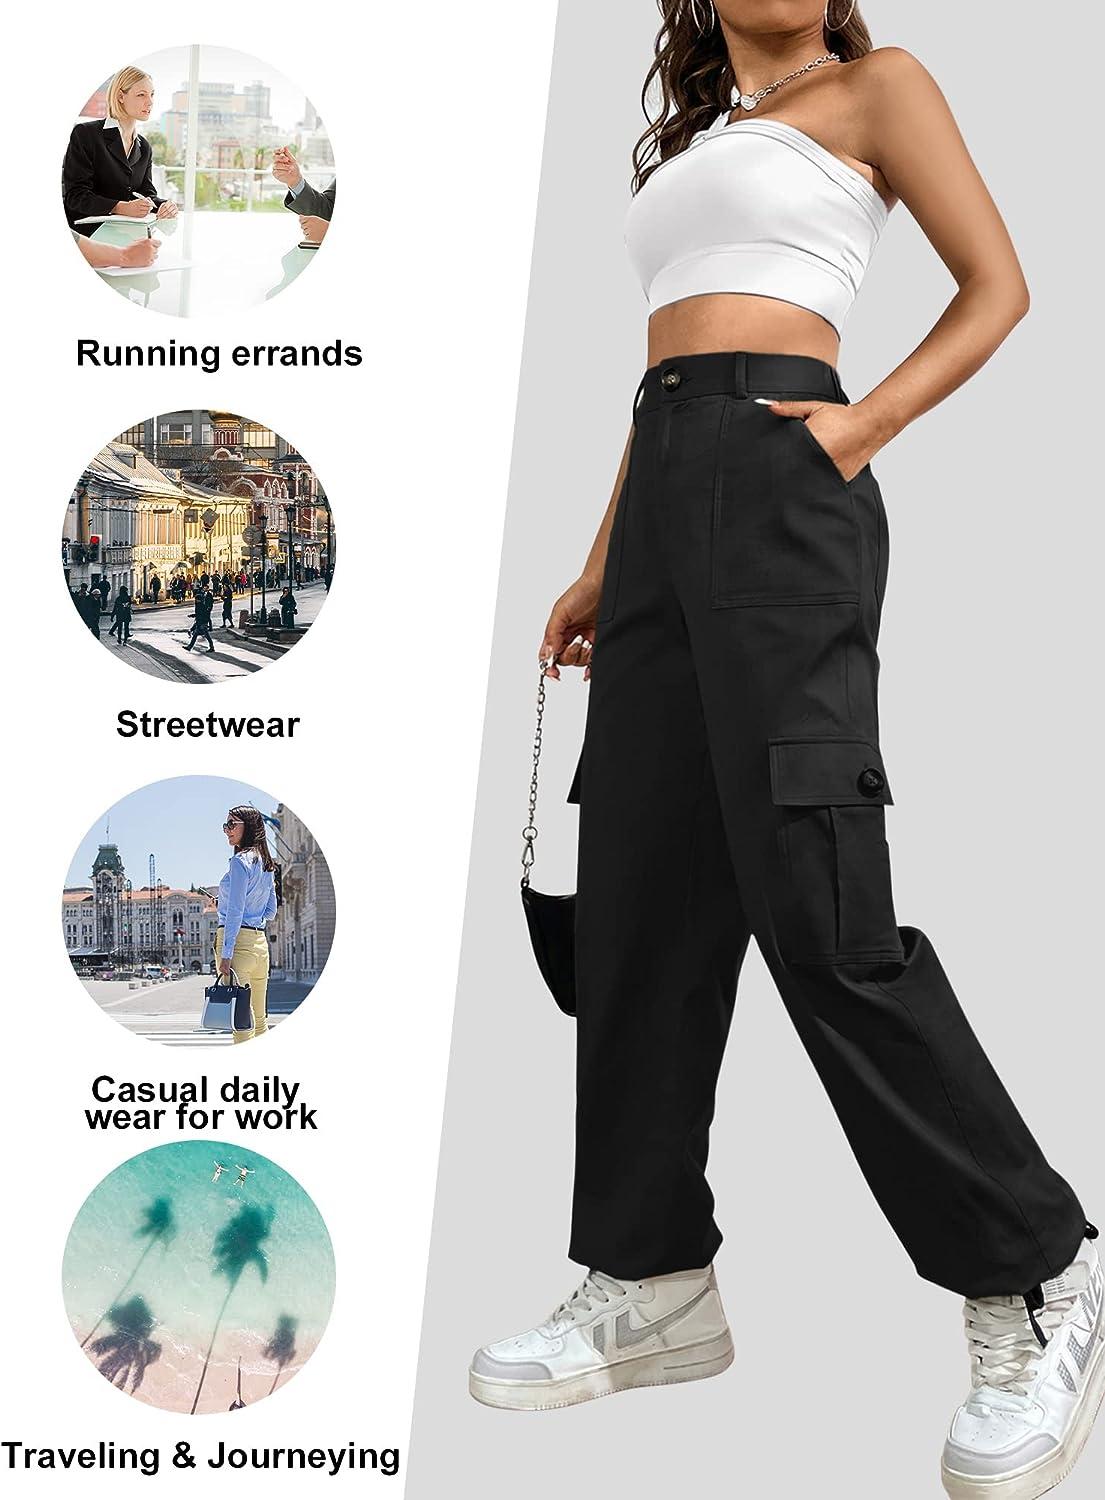 gvdentm Maternity Pants Cargo Pants for Women High Waisted Travel Tactical  Streetwear Casual Pants with 6 Pockets Drawstring Ankle Casual 